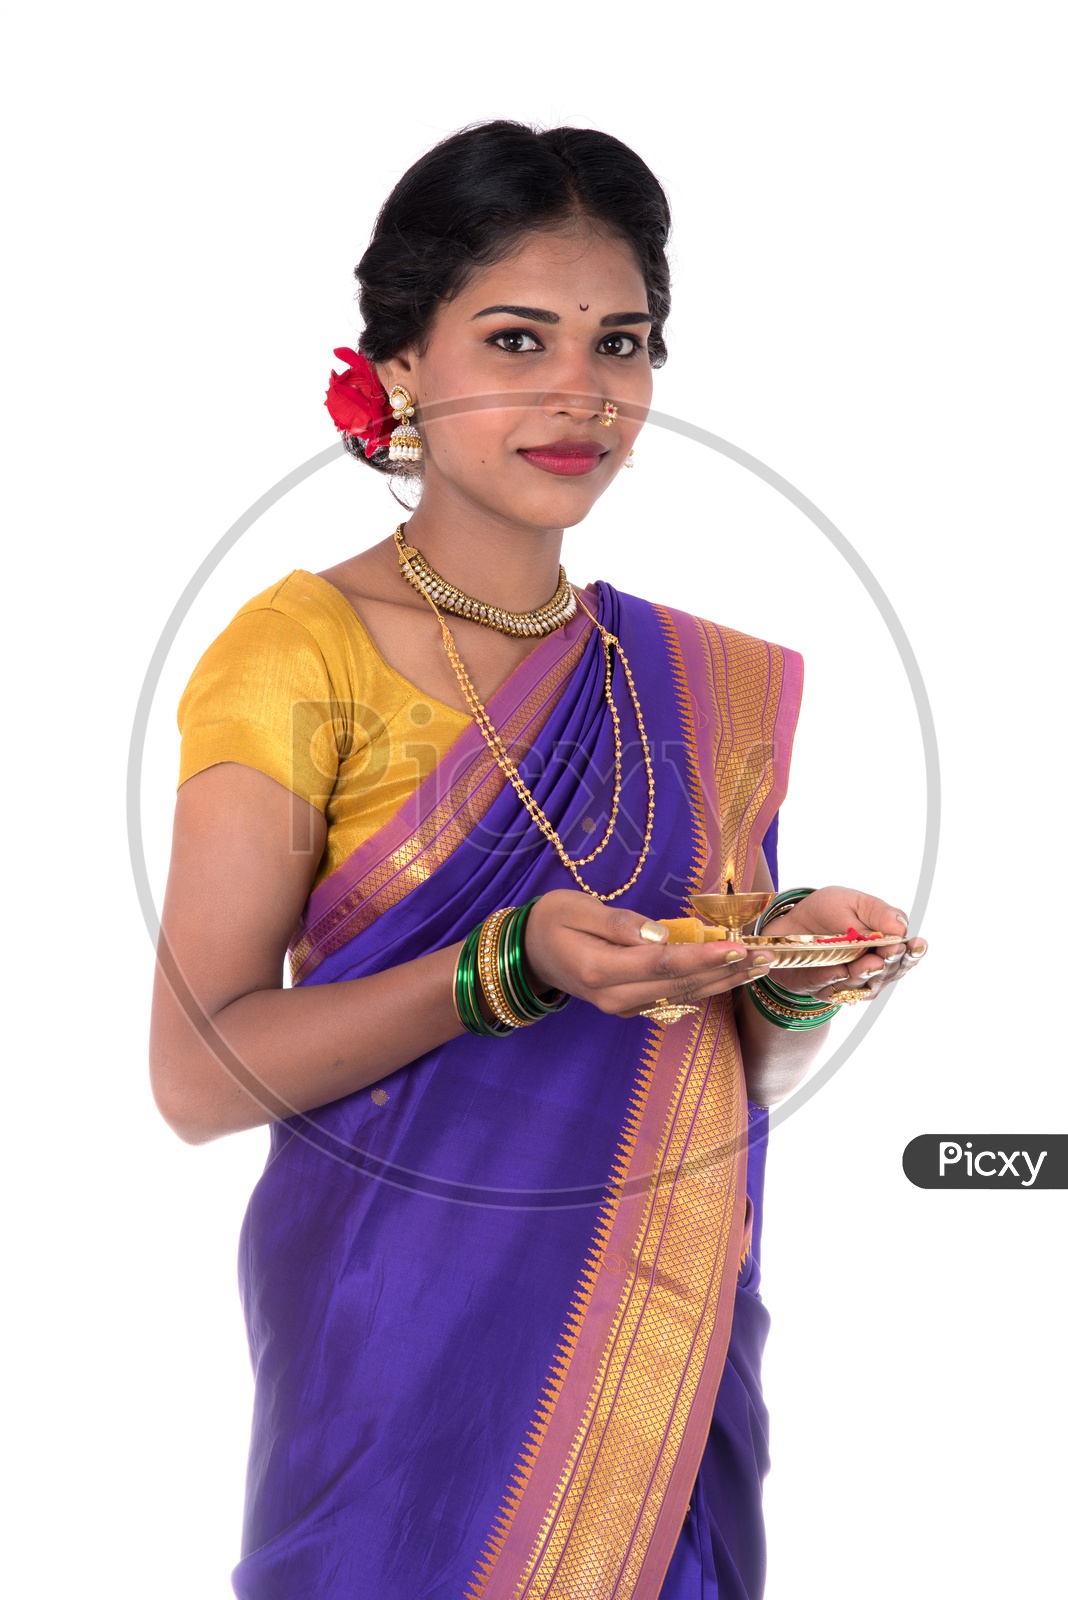 Portrait Of a Beautiful Young Girl Wearing Traditional Saree and holding Pooja Thali Or Plate For  Performing Worship on an Isolated White Background